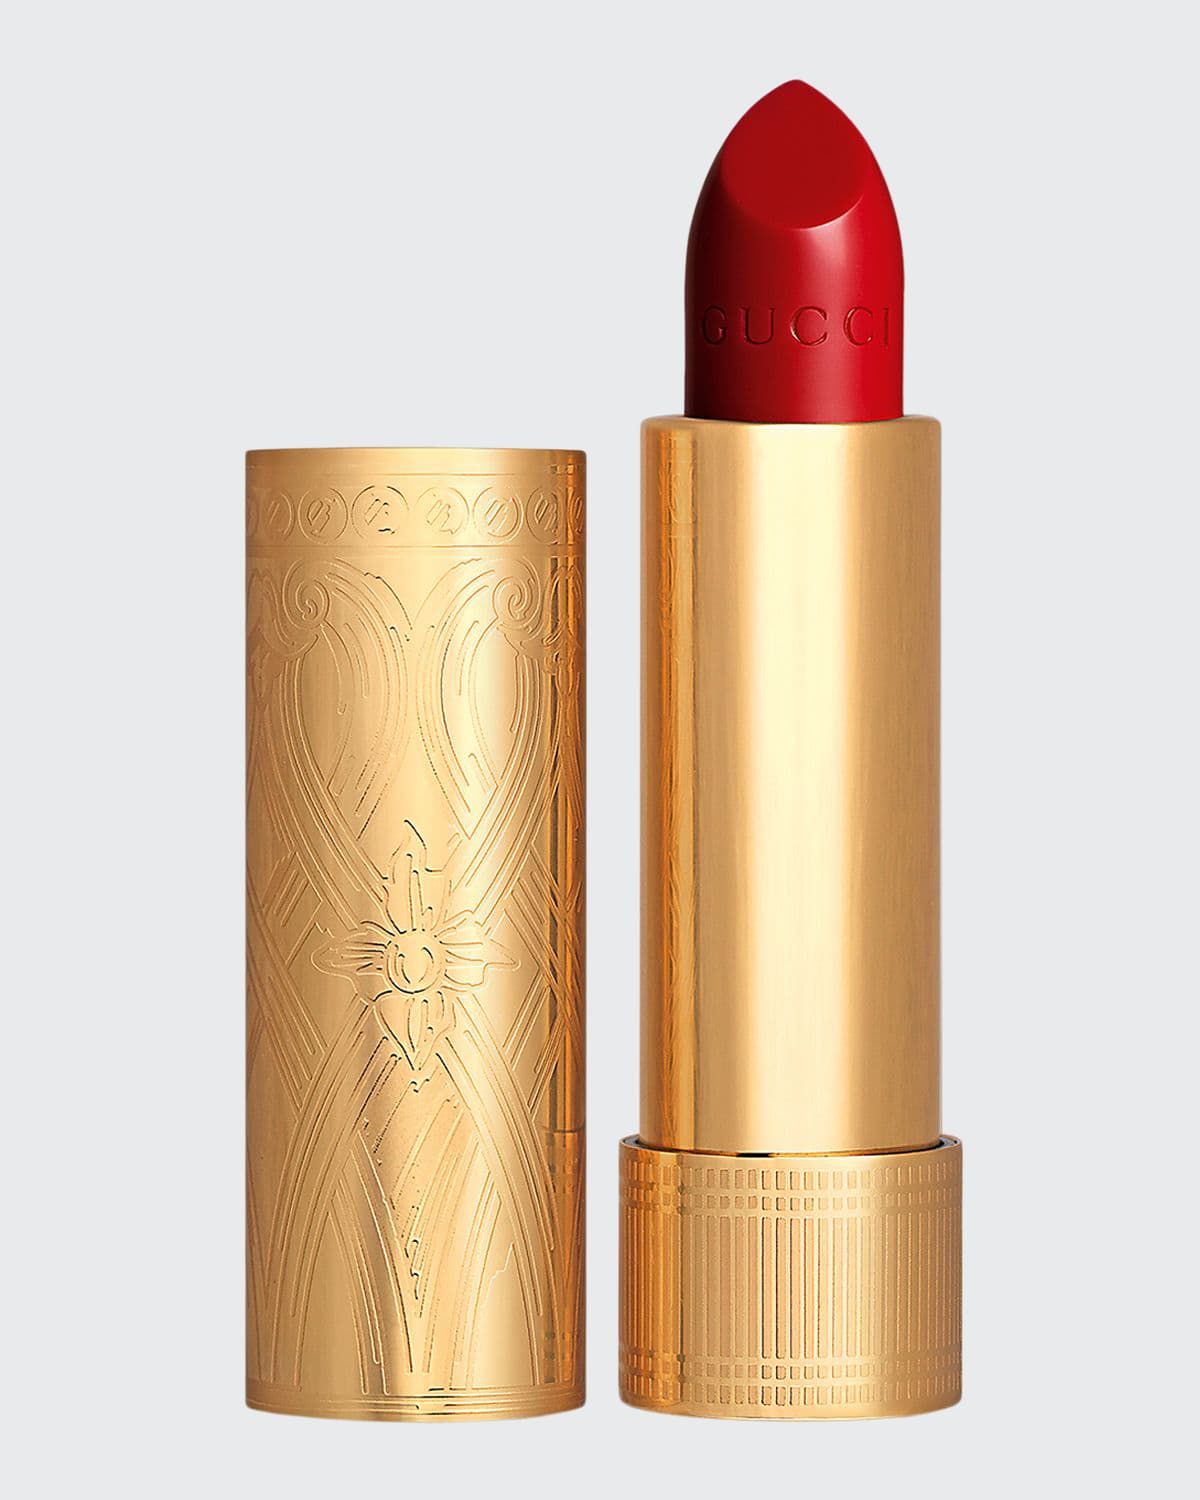 Gucci Rouge &#224 L&#232vres Satin Lipstick In 25 Goldie Red